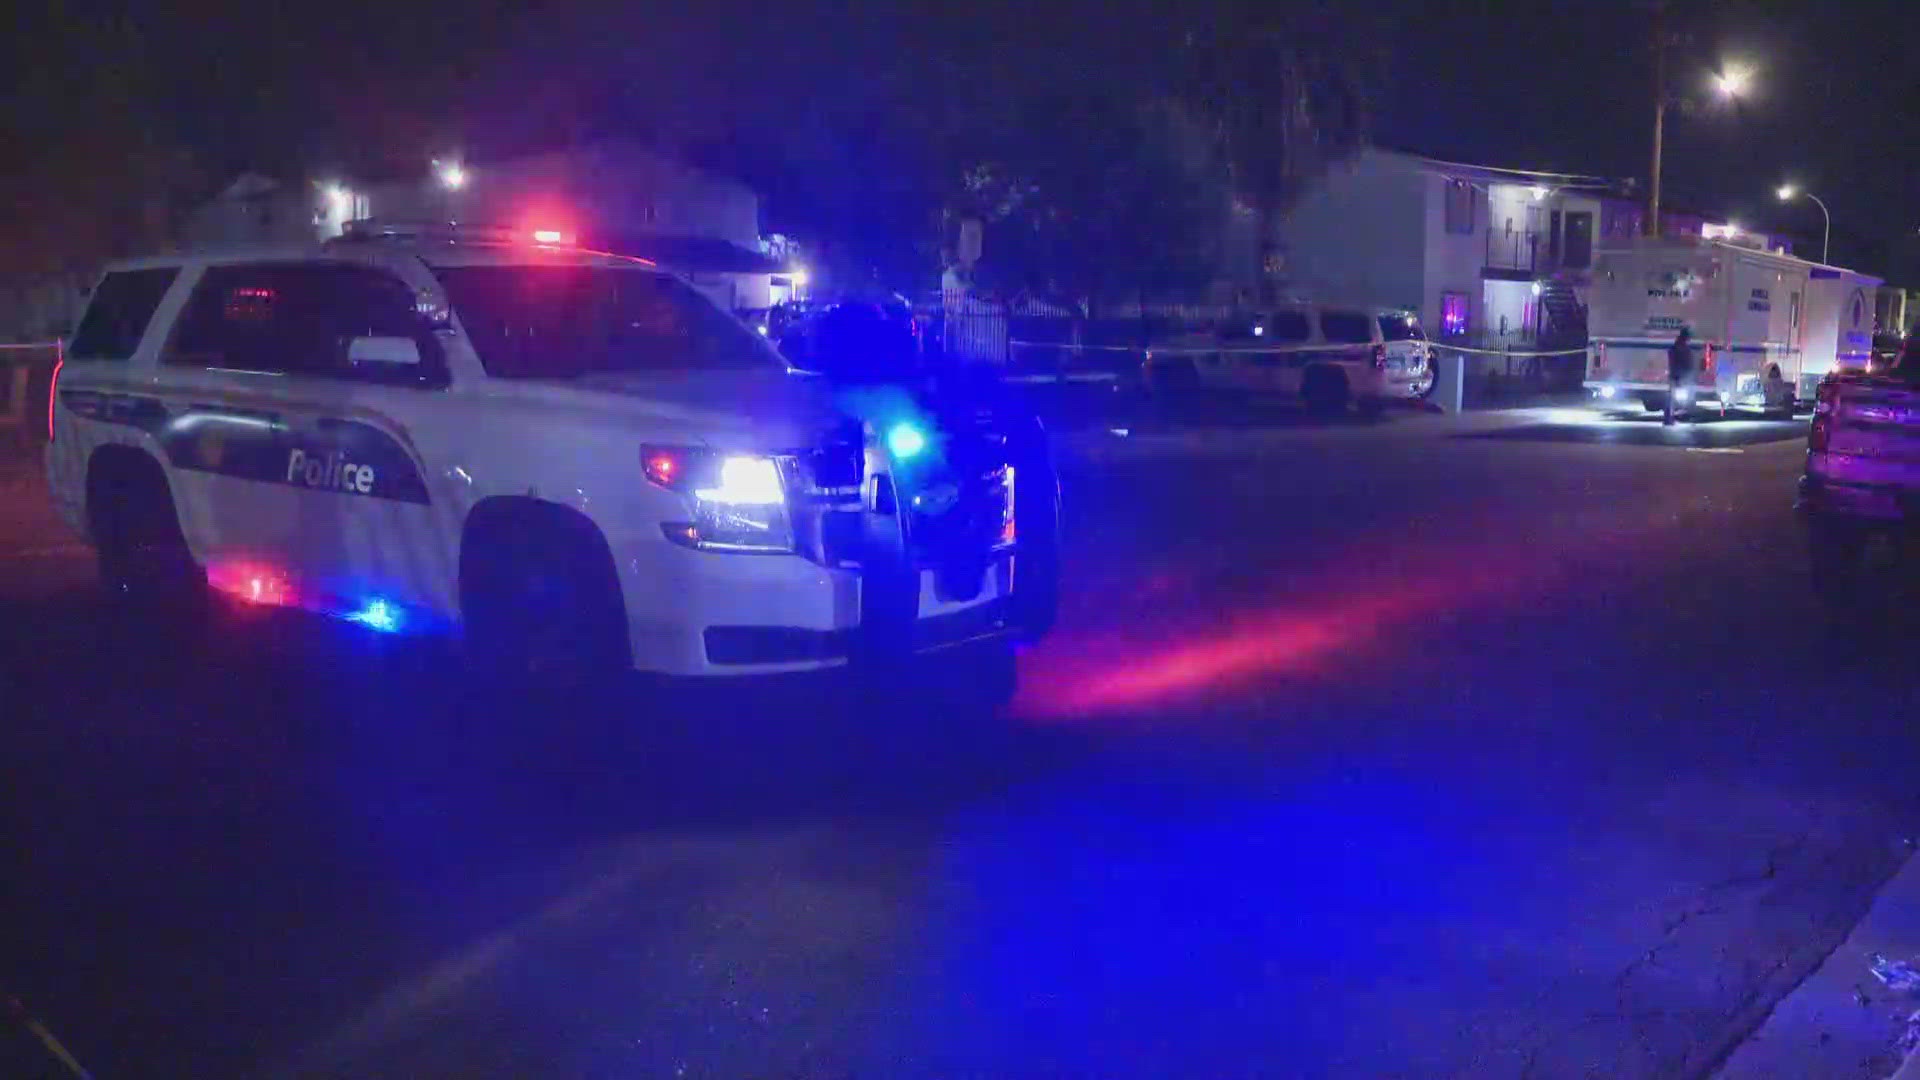 The shooting happened Tuesday night near 27th Avenue and Indian School Road, Phoenix police said.